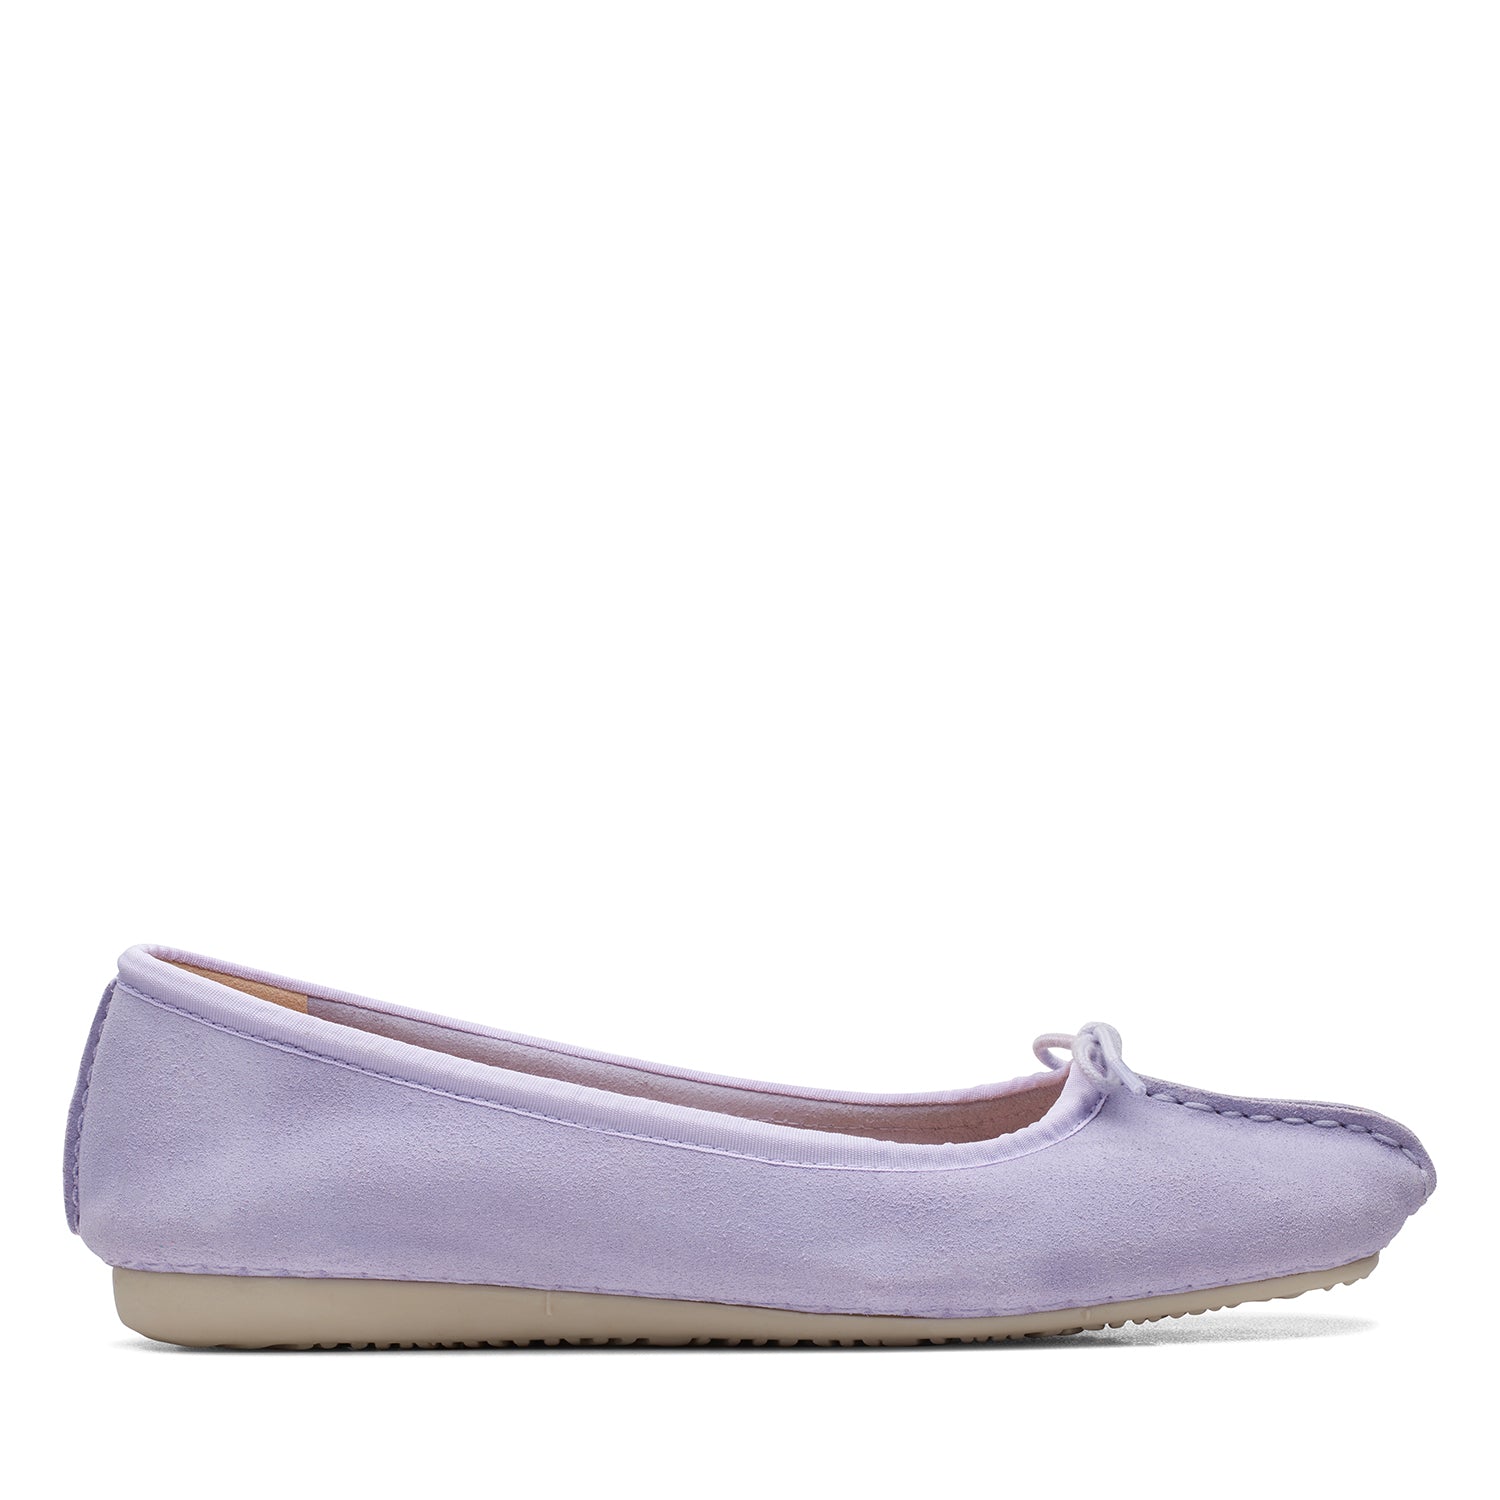 Clarks Freckle Ice Shoes - Lilac Suede - 261709614 - D Width (Standard Fit)